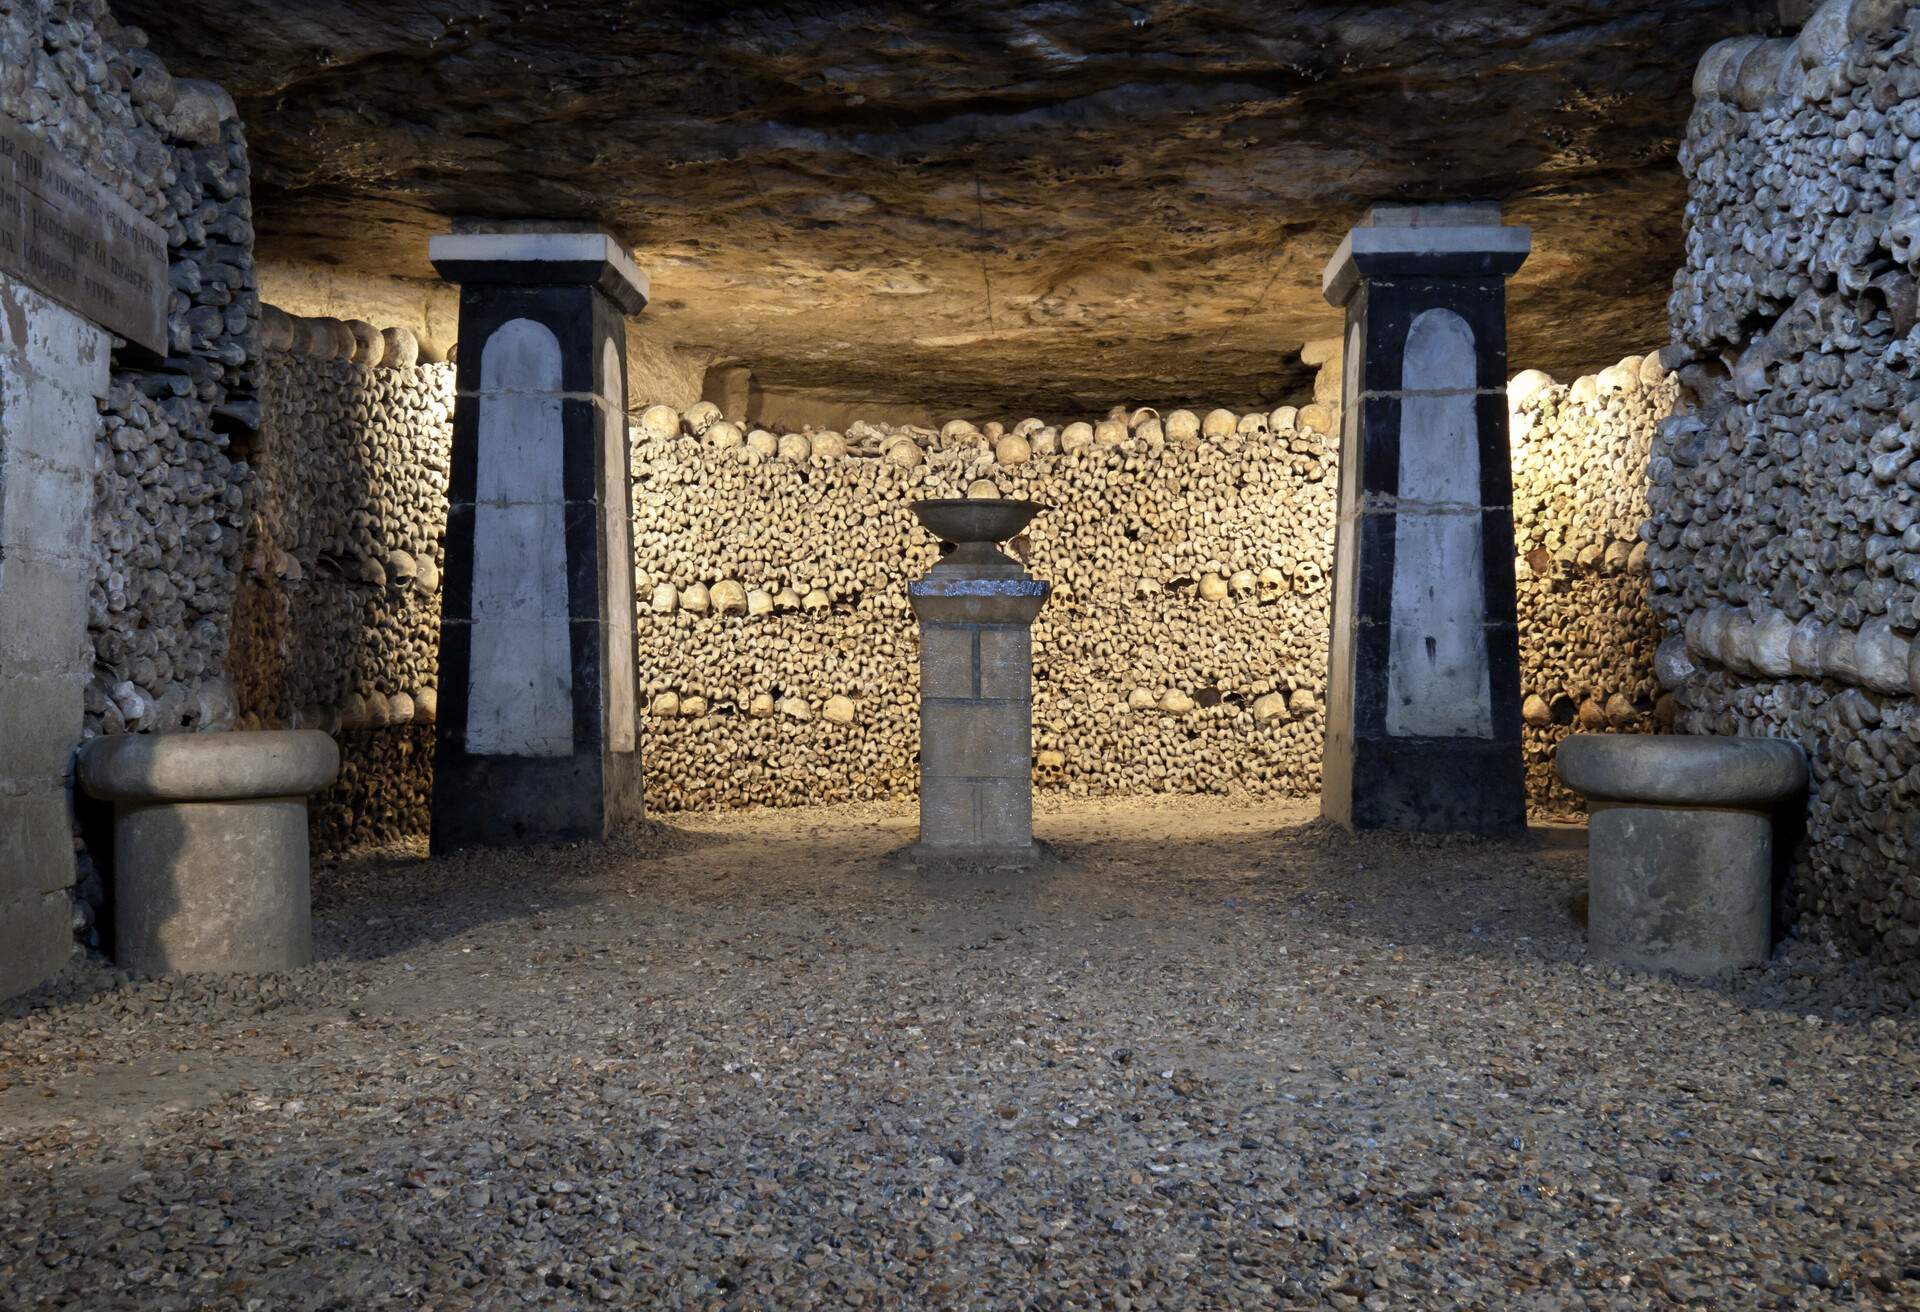 In 1785, Paris decided to solve the problem of its overflowing cemeteries by exhuming the bones of the buried and relocating them to the tunnels of several disused quarries, which were consecrated as a cemetery. It is estimated that about one million bodies are buried here. Paris, France.